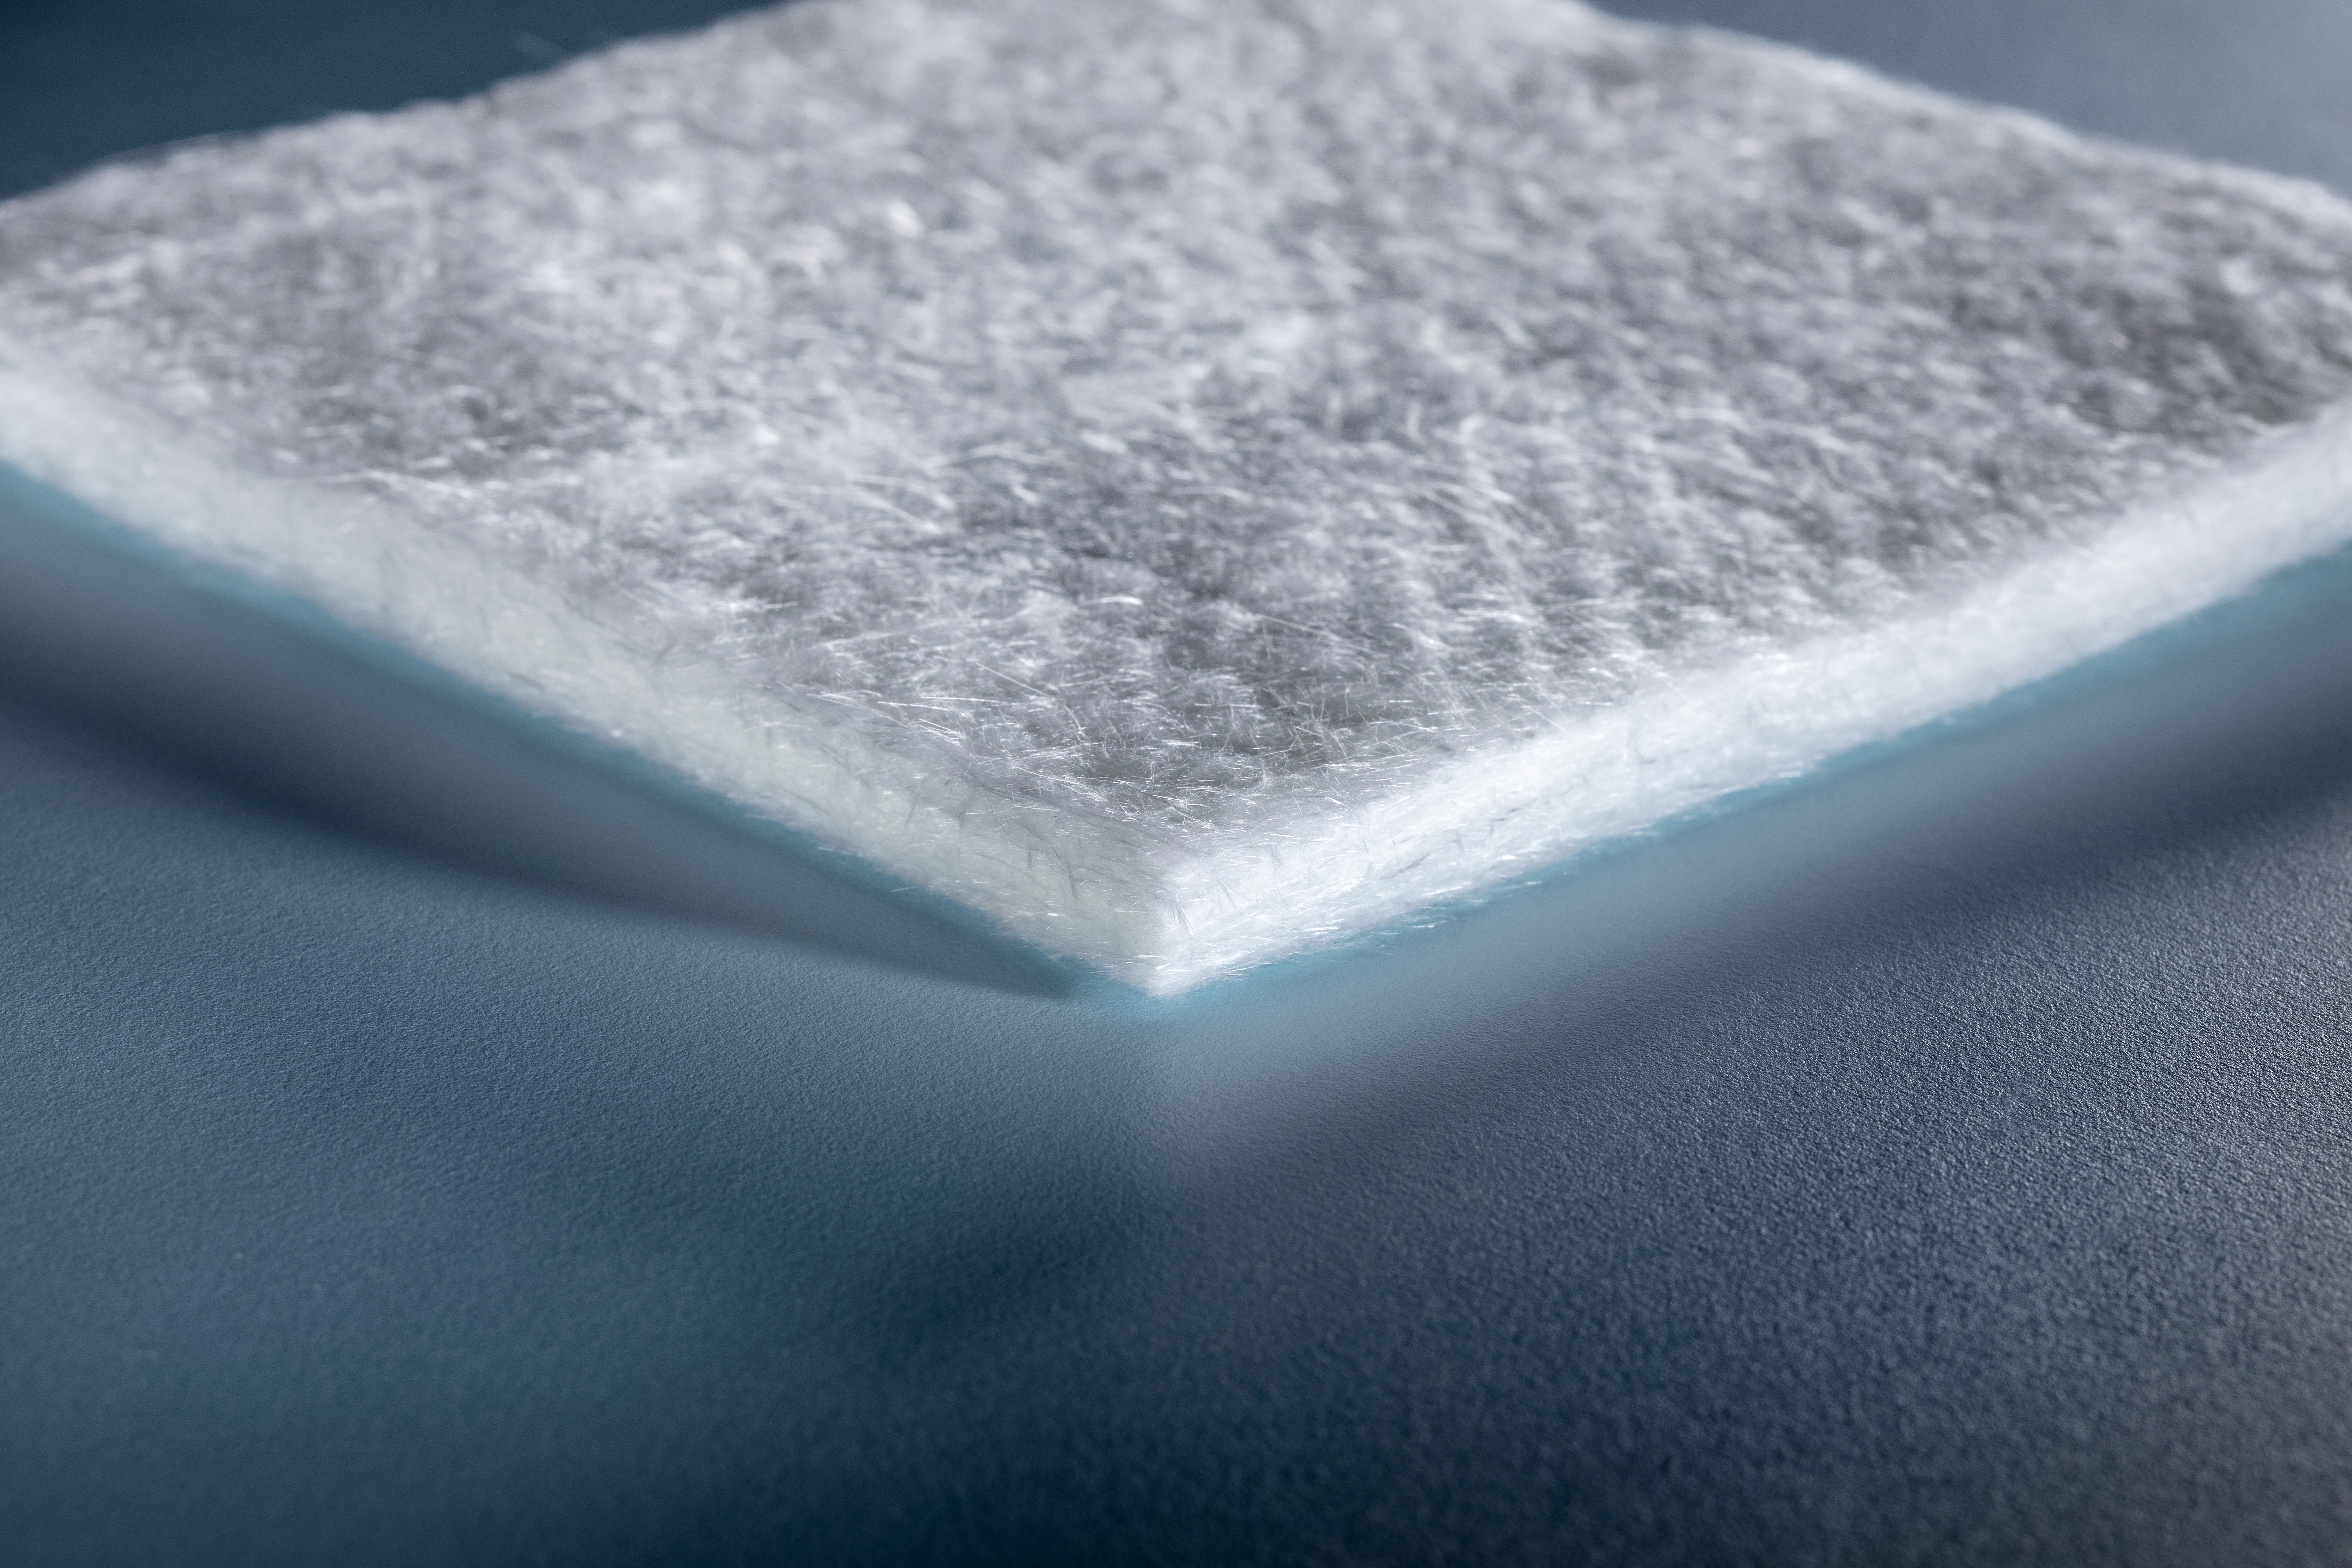 The non-woven and glass mat thermoplastic materials can be tailored to acoustic and thermal insulation requirements.